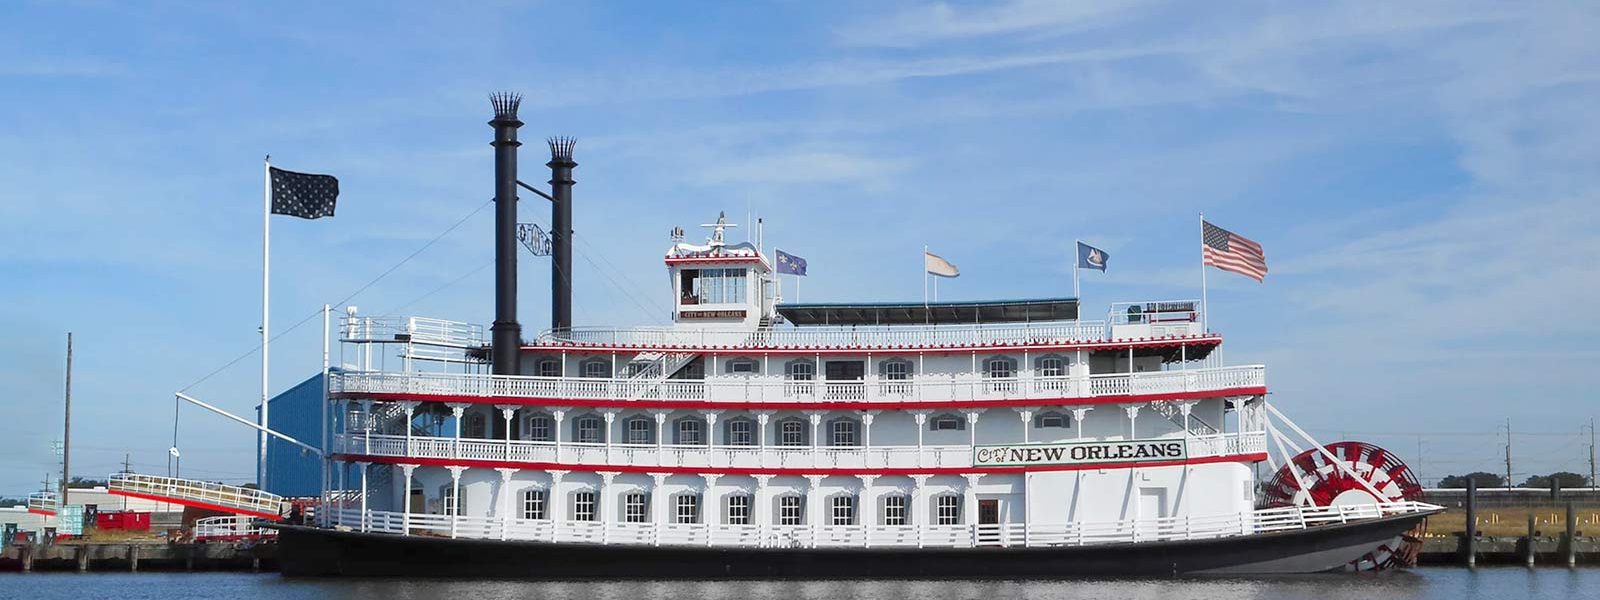 new orleans riverboat tour